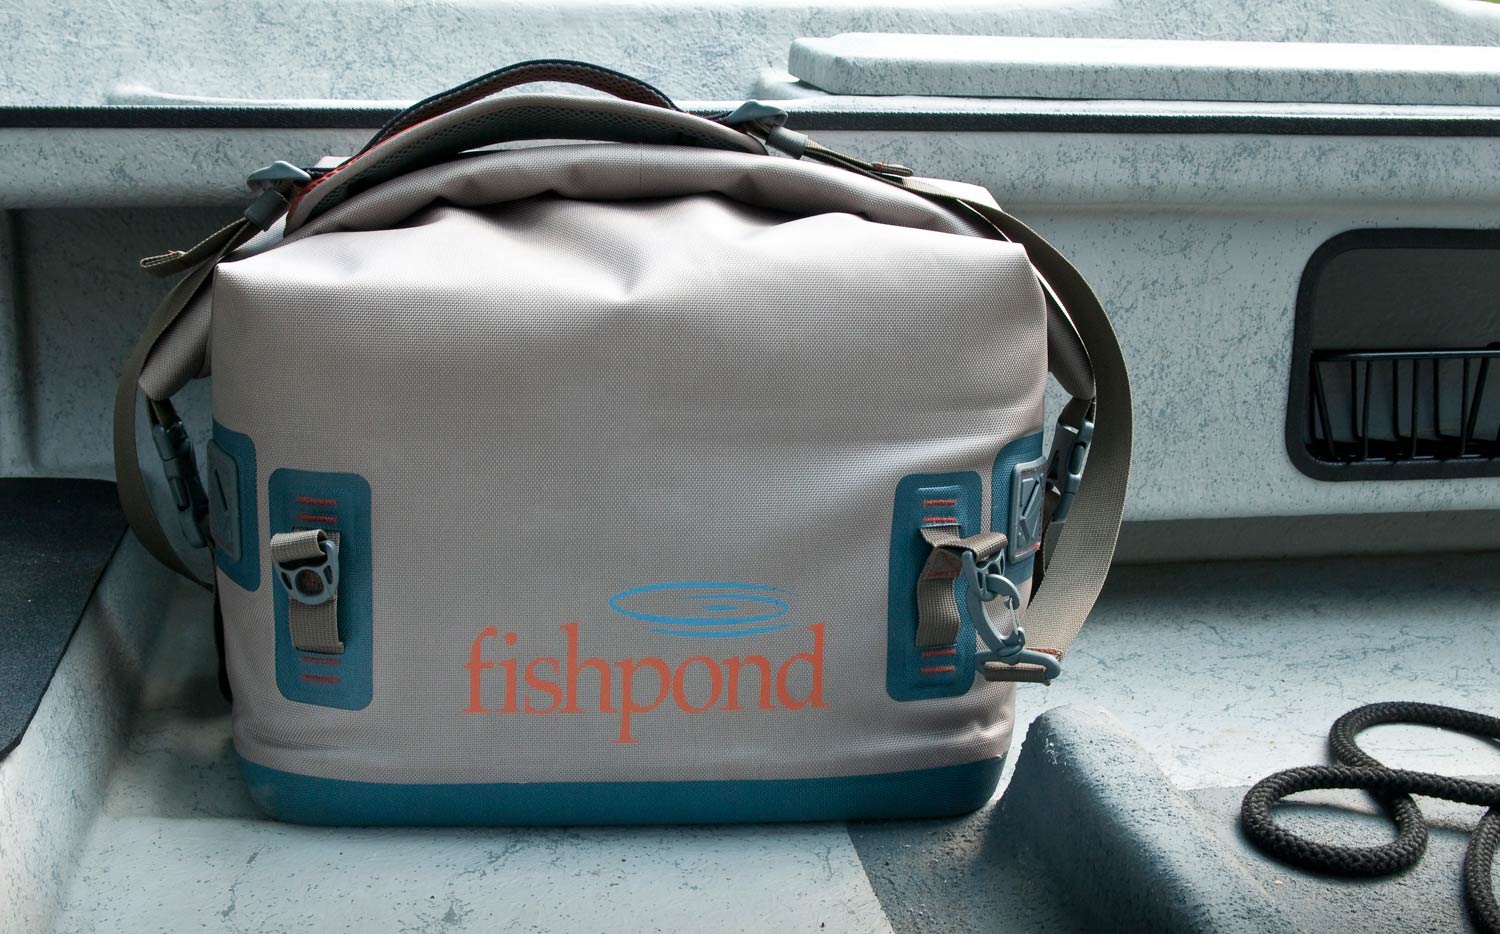 The Fishpond Roll Top Boat Bag Makes My Life A Whole Lot Easier